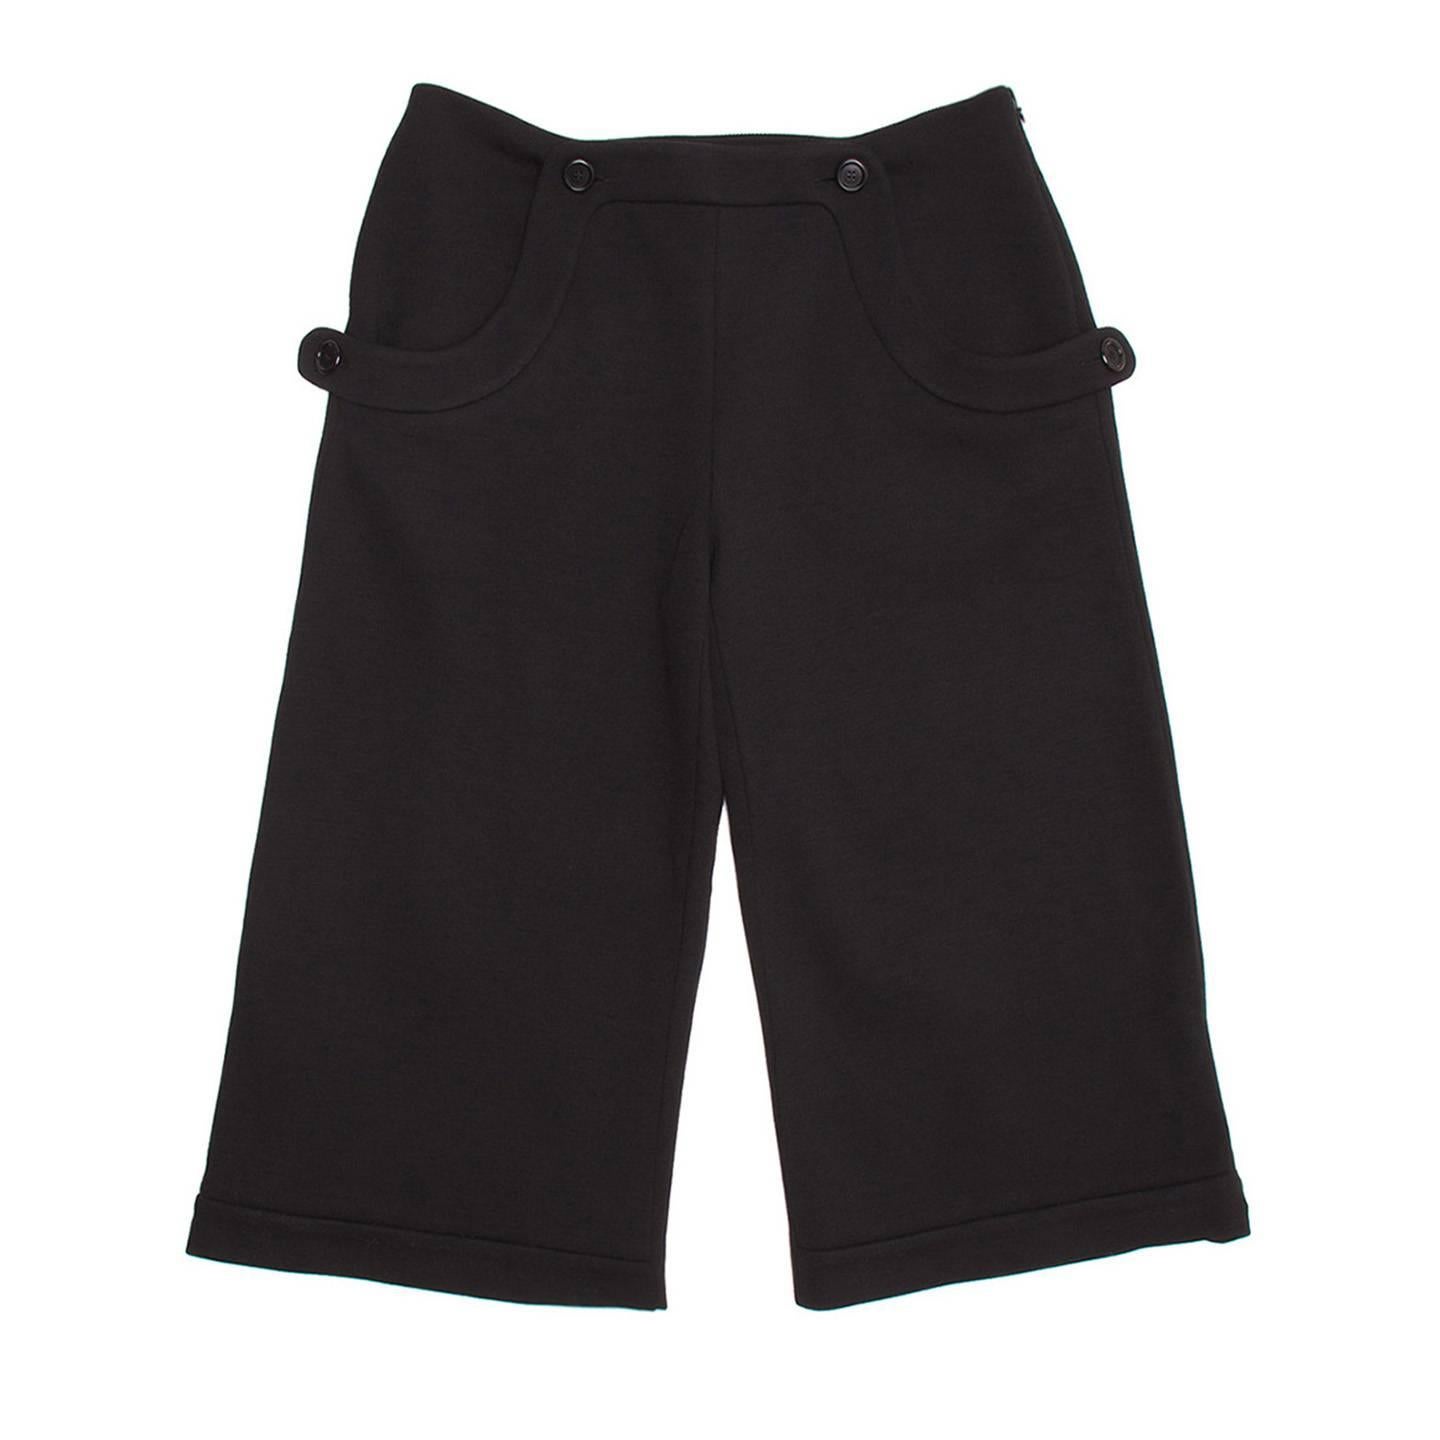 Black wool sailor style cropped culottes with broad hip pockets and side zipper opening. Wide self fabric binding detail at front waistline and scooped pockets with functional buttons. Back darts at back waistline and tab with button at back